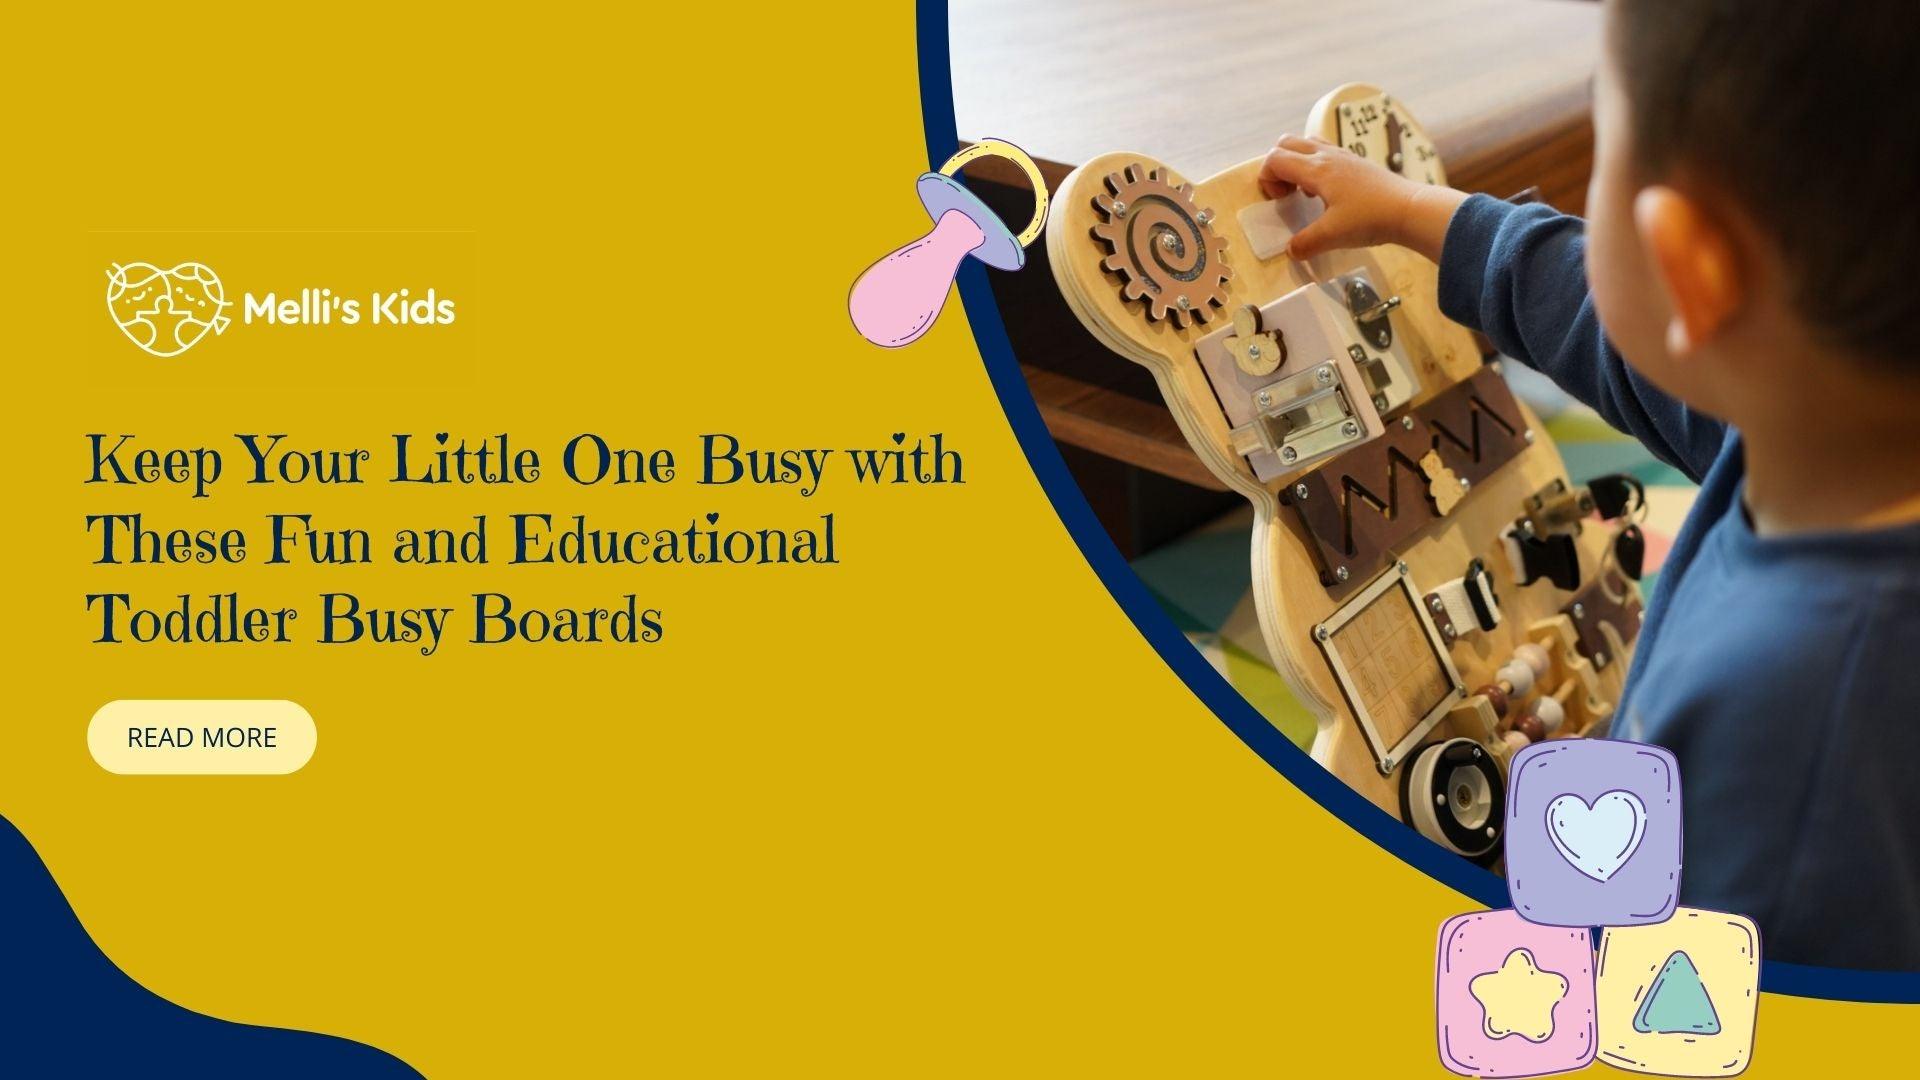 Keep Your Little One Busy with These Fun and Educational Toddler Busy Boards - Melli's Kids